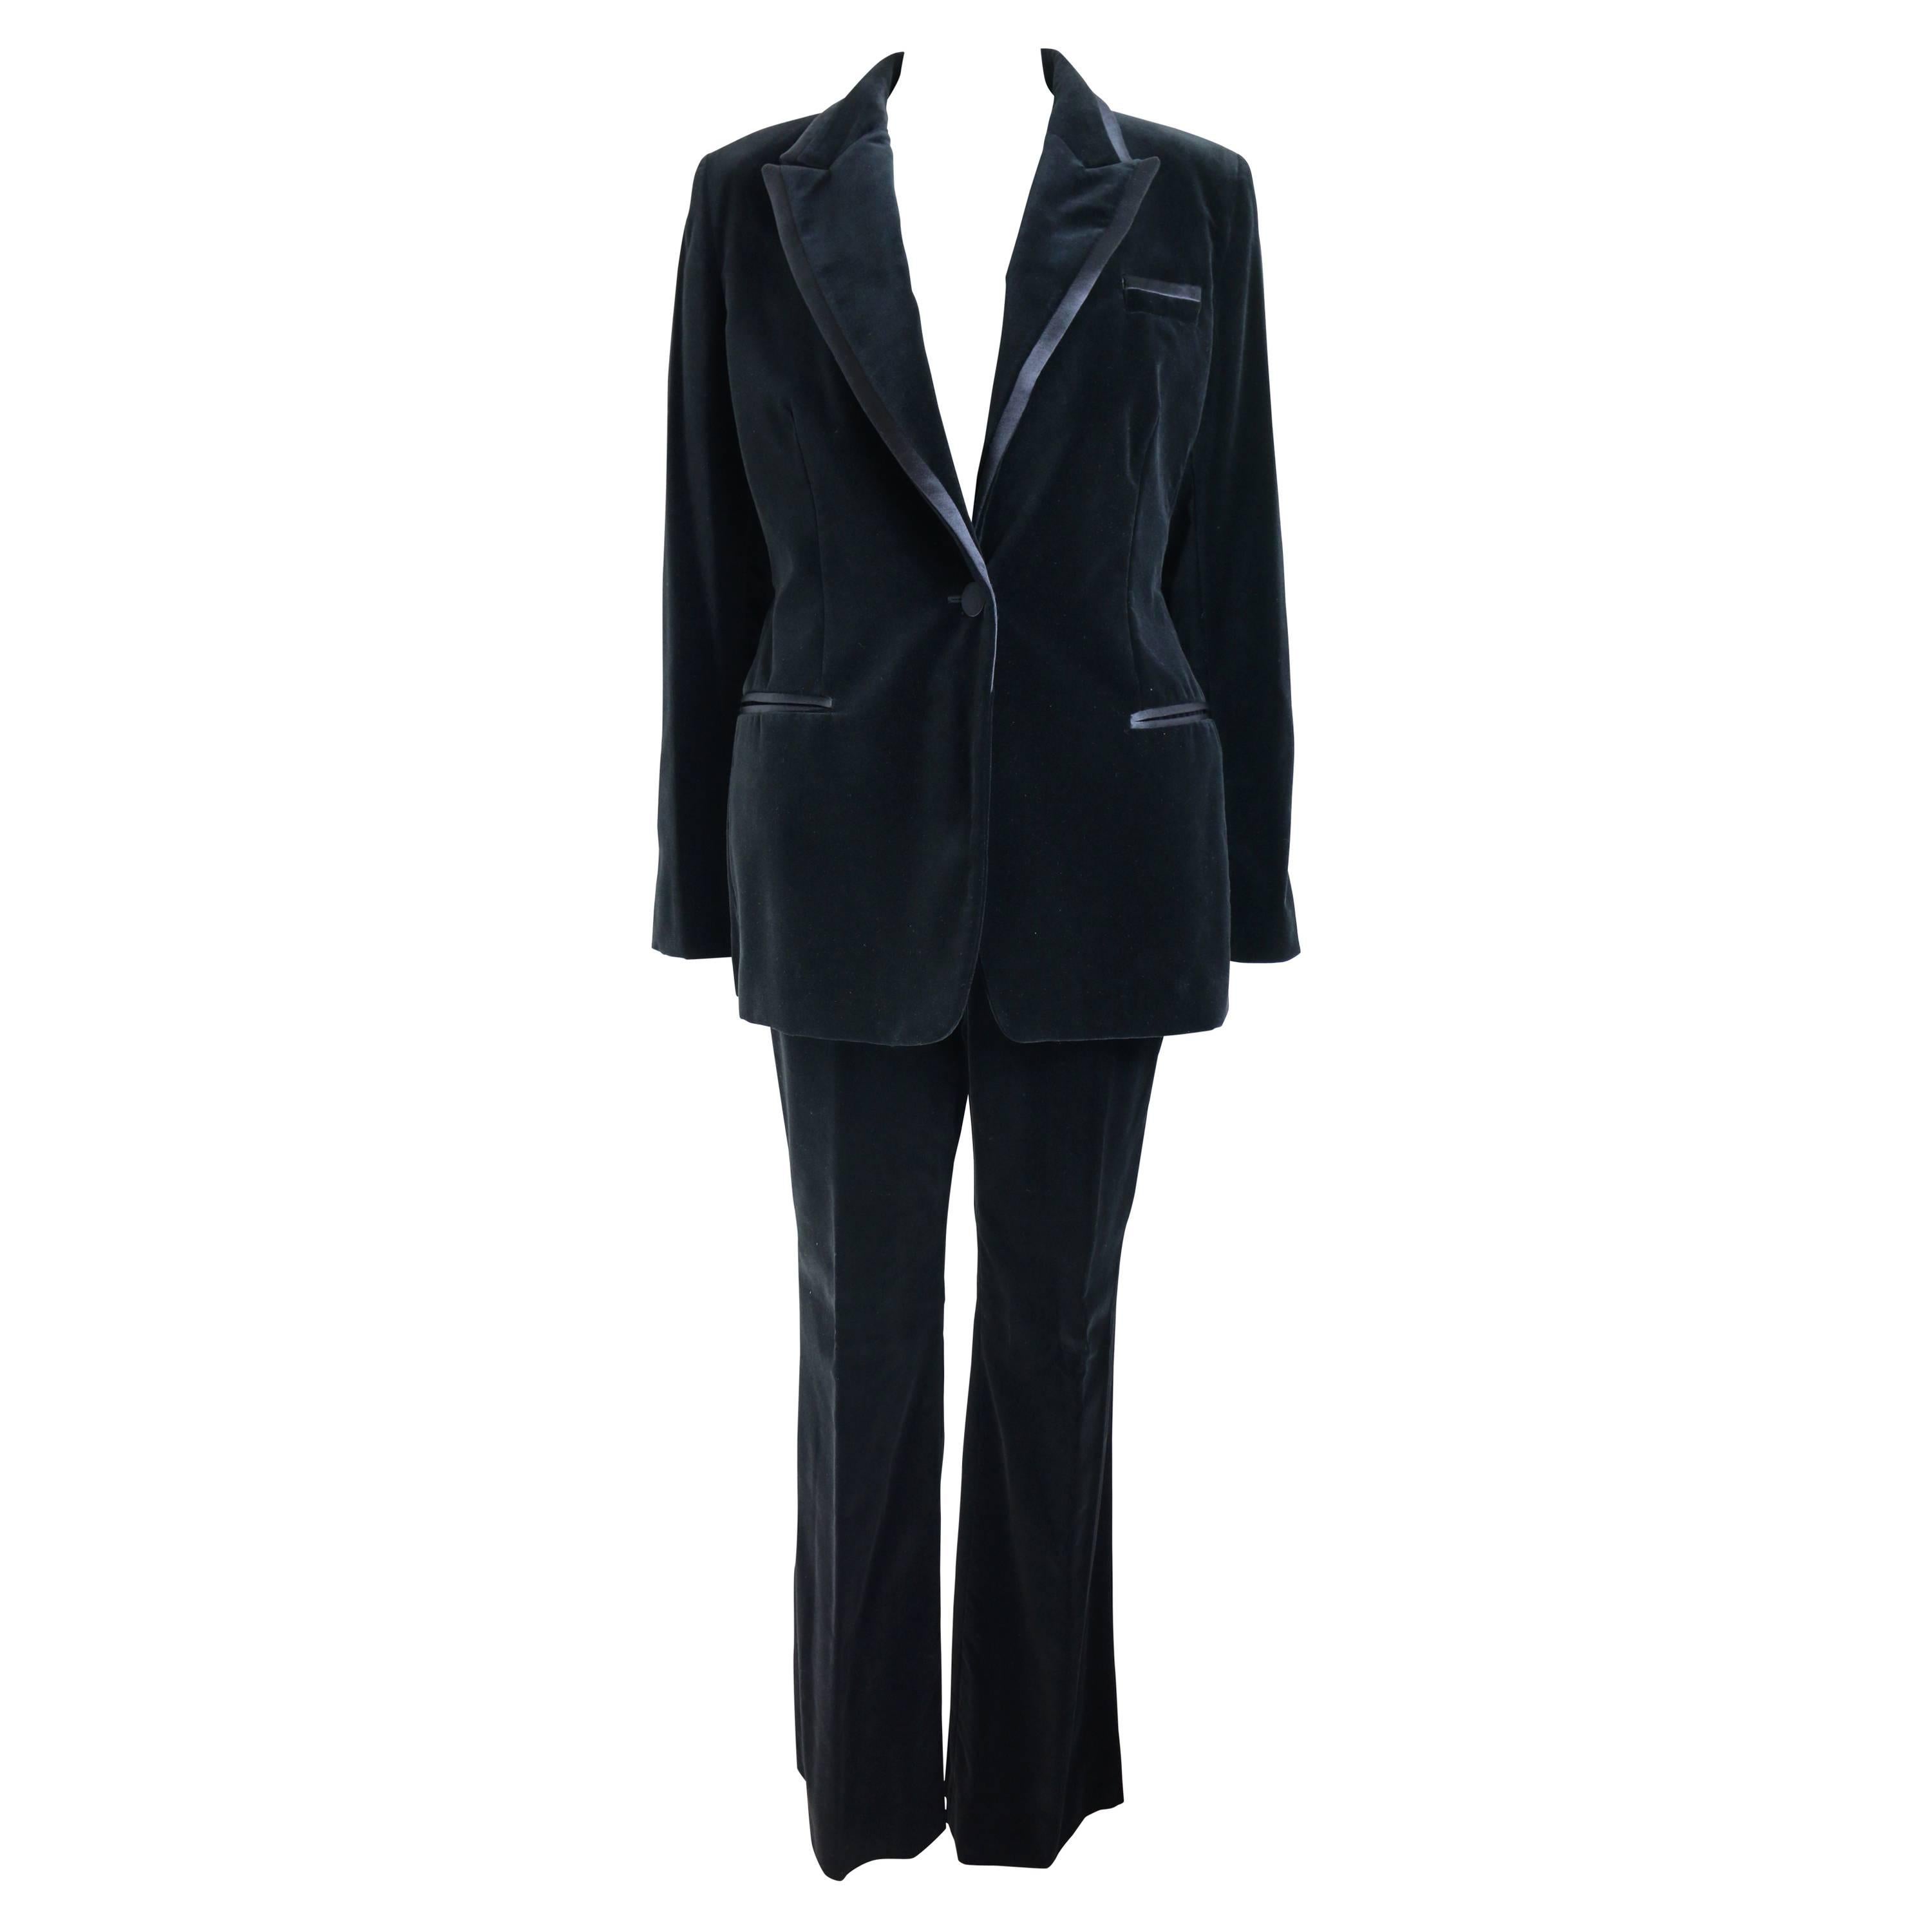 Iconic Gucci By Tom Ford Black Velvet Tuxedo Suit For Sale